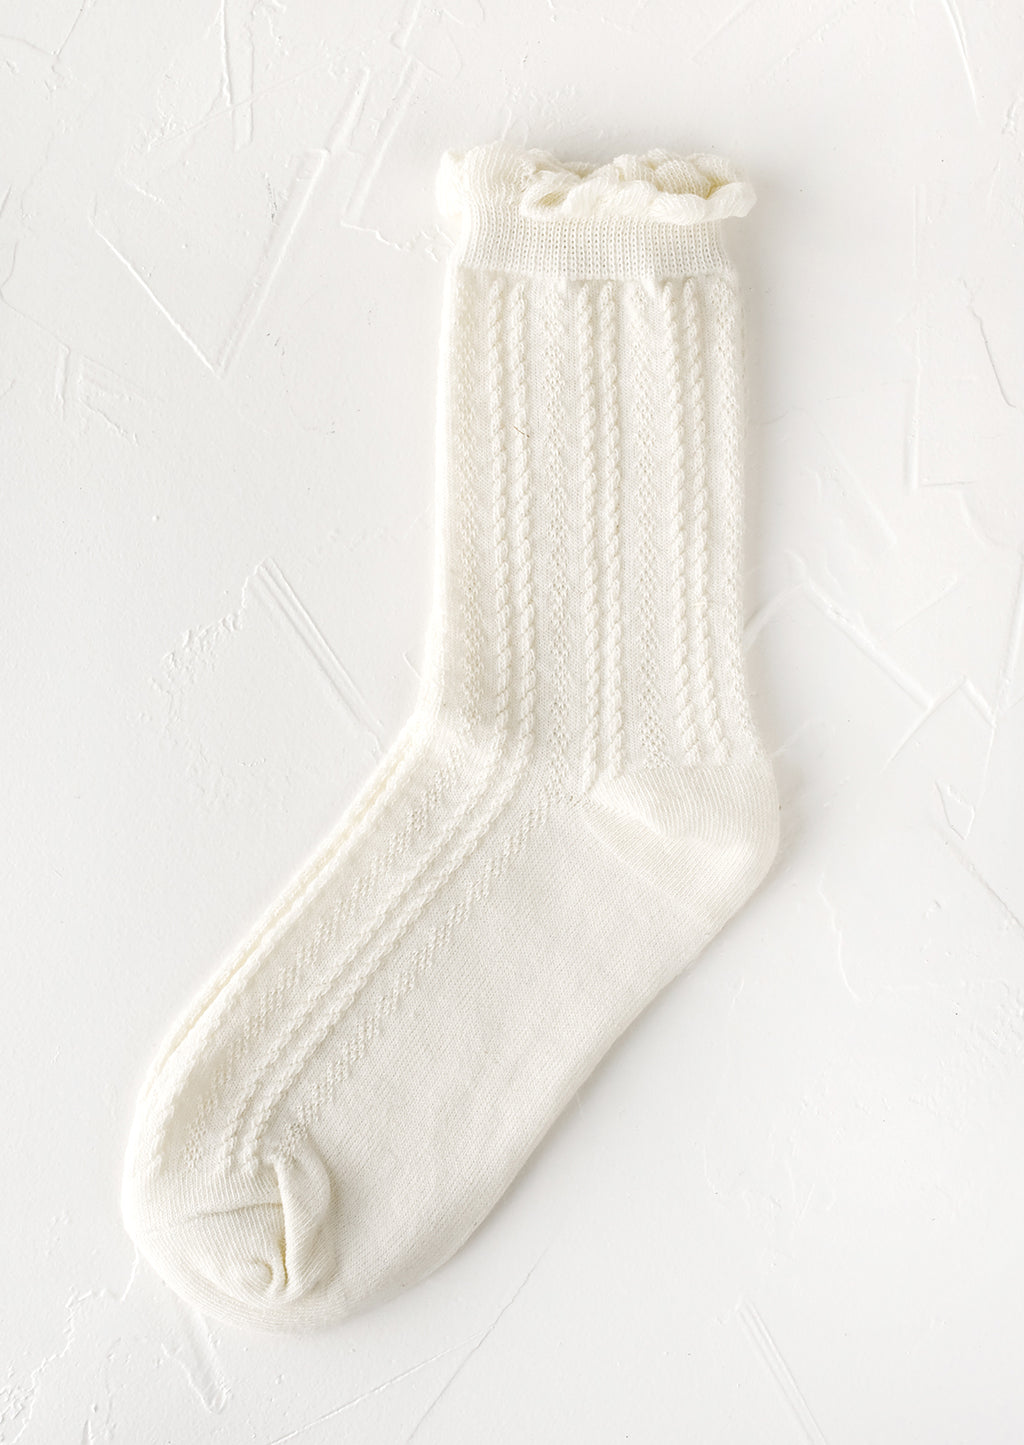 White: A pair of cable knit socks with ruffled ankle in white.